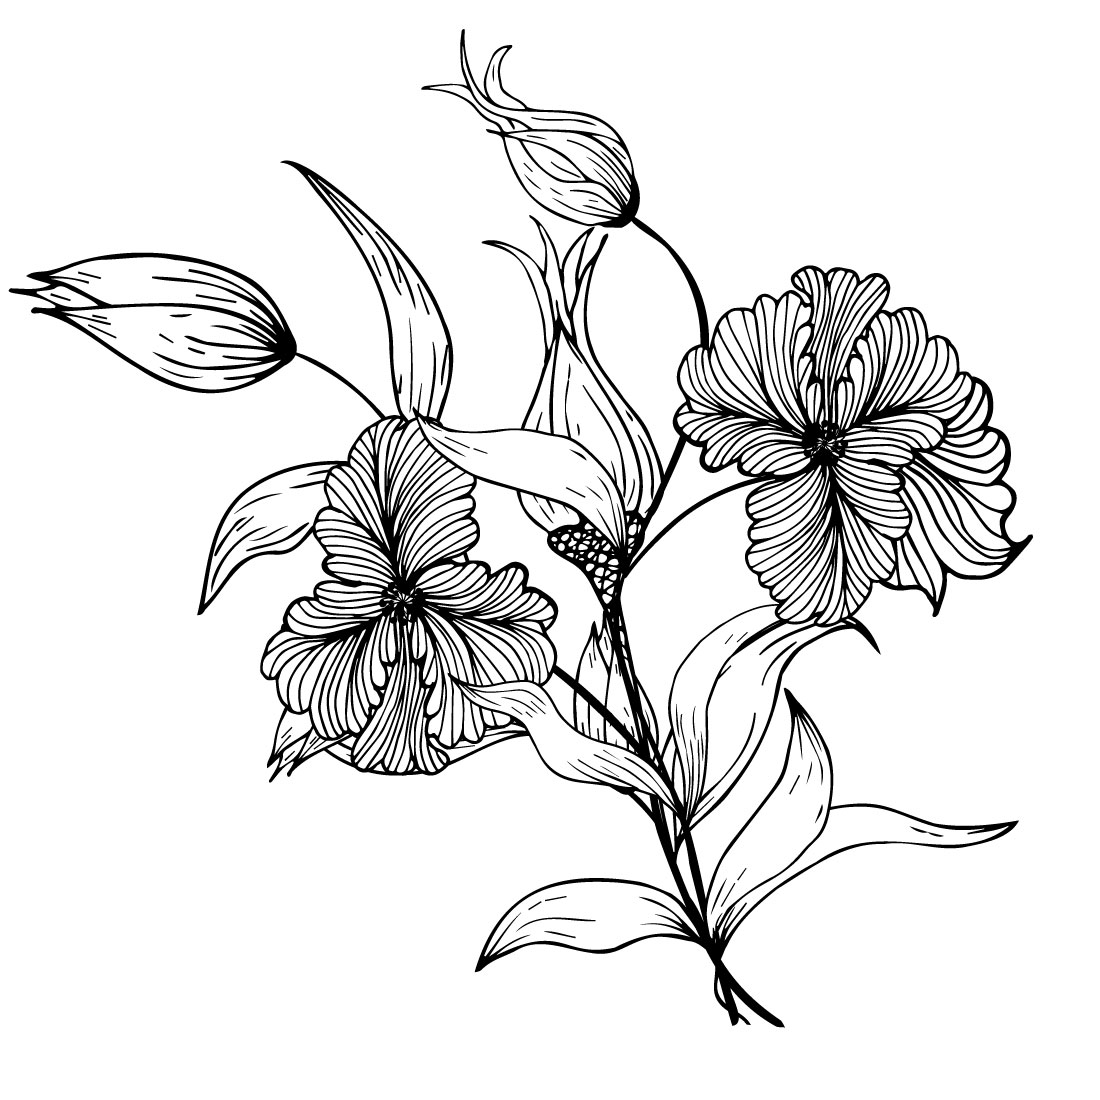 Hand drawn flowers with leaves.